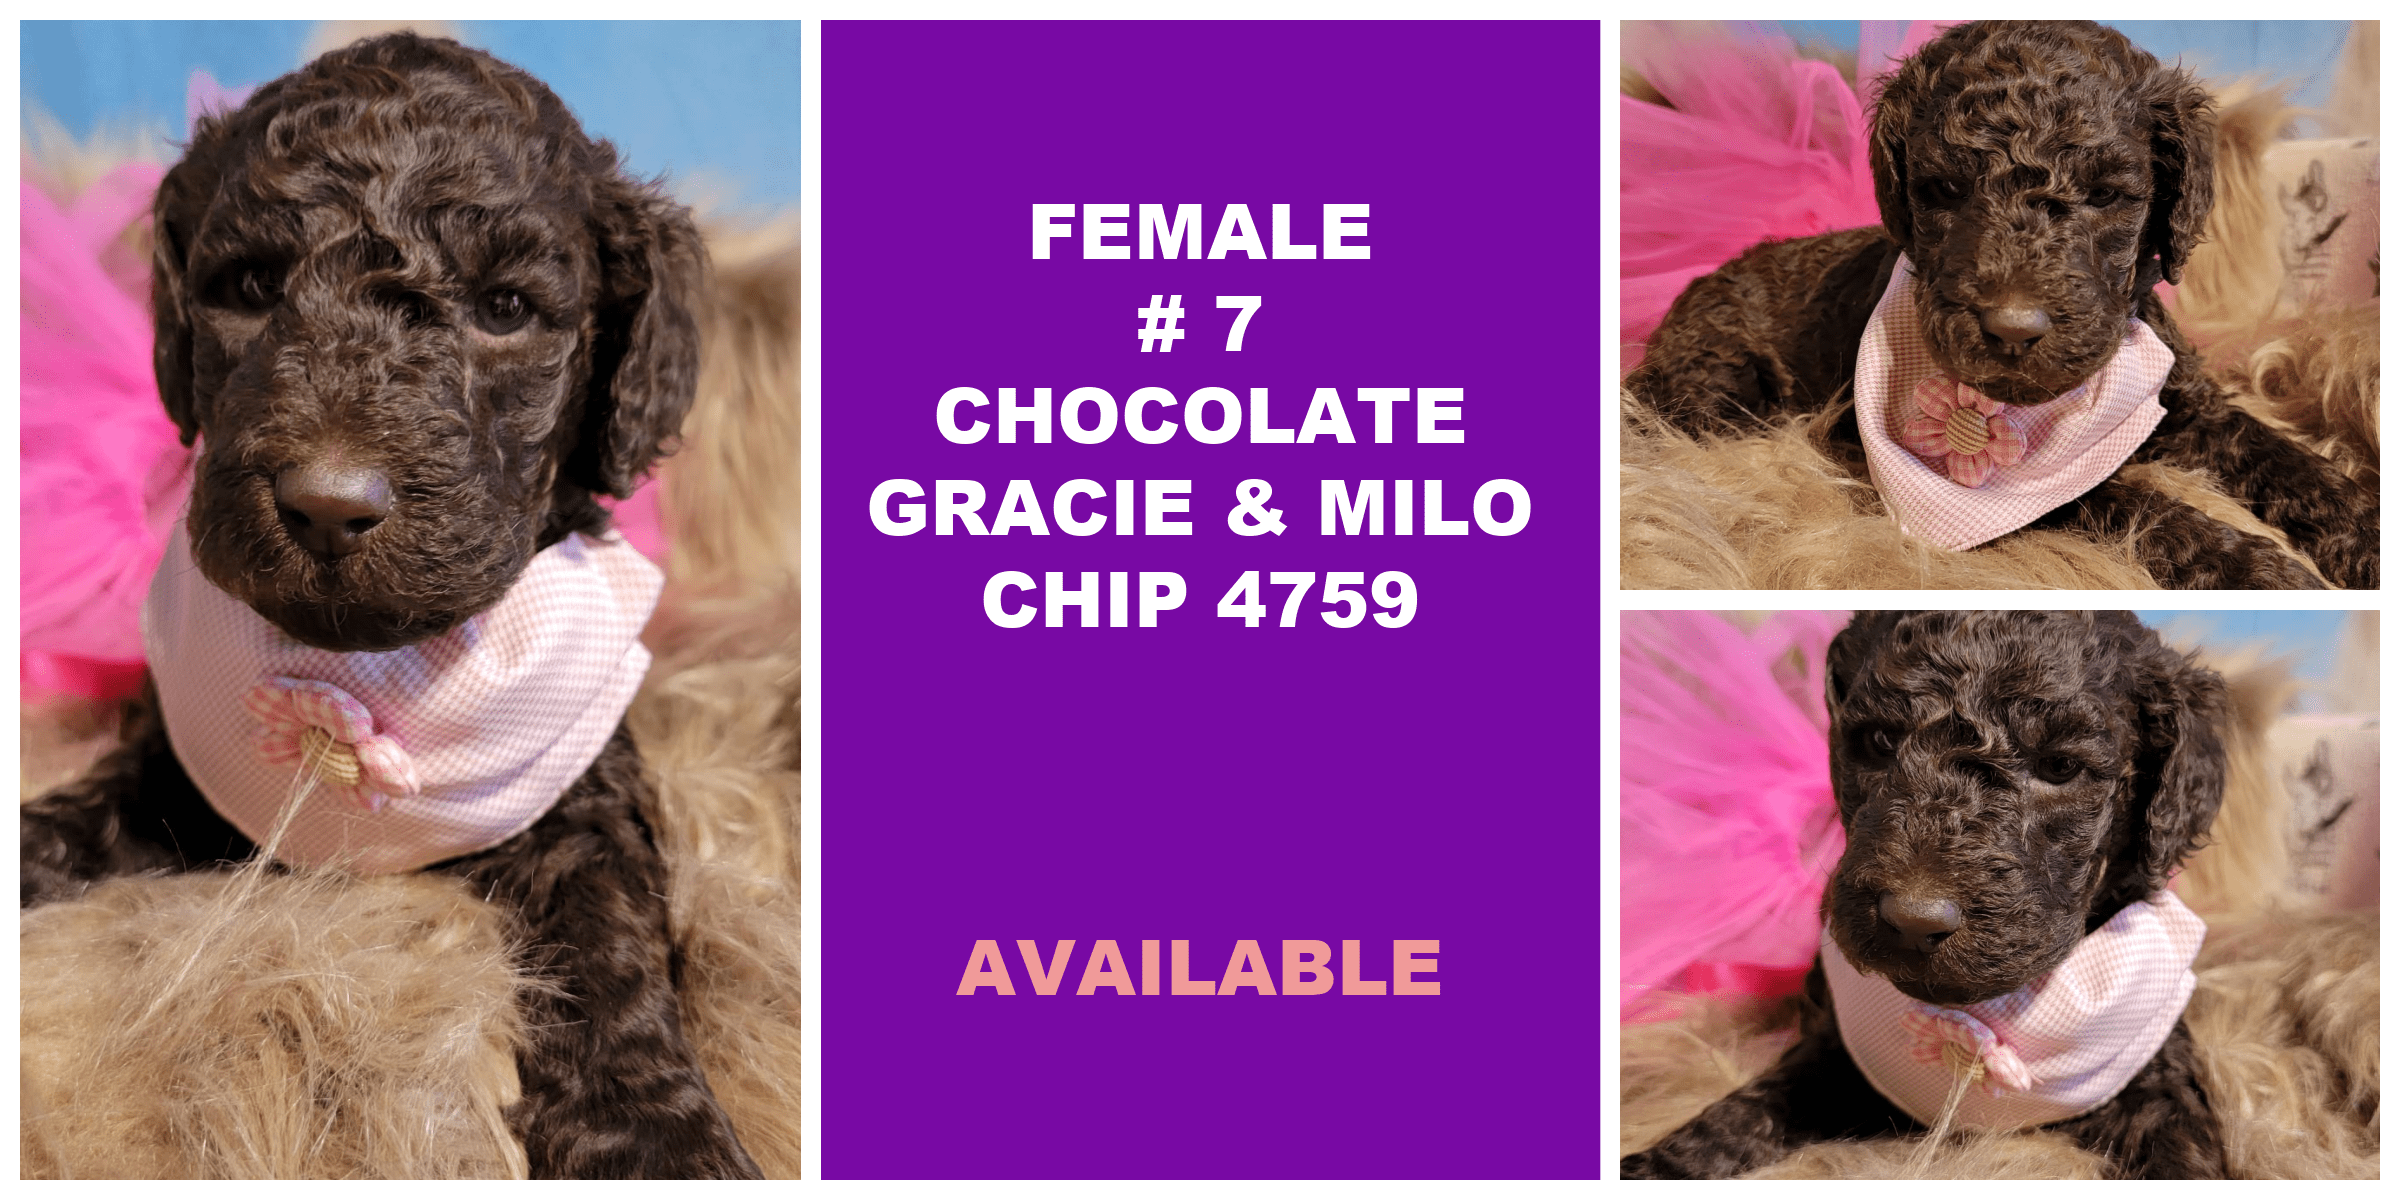 FEMALE 7 CHOCOLATE GRACIE MILO CHIP 4759 AVAILABLE